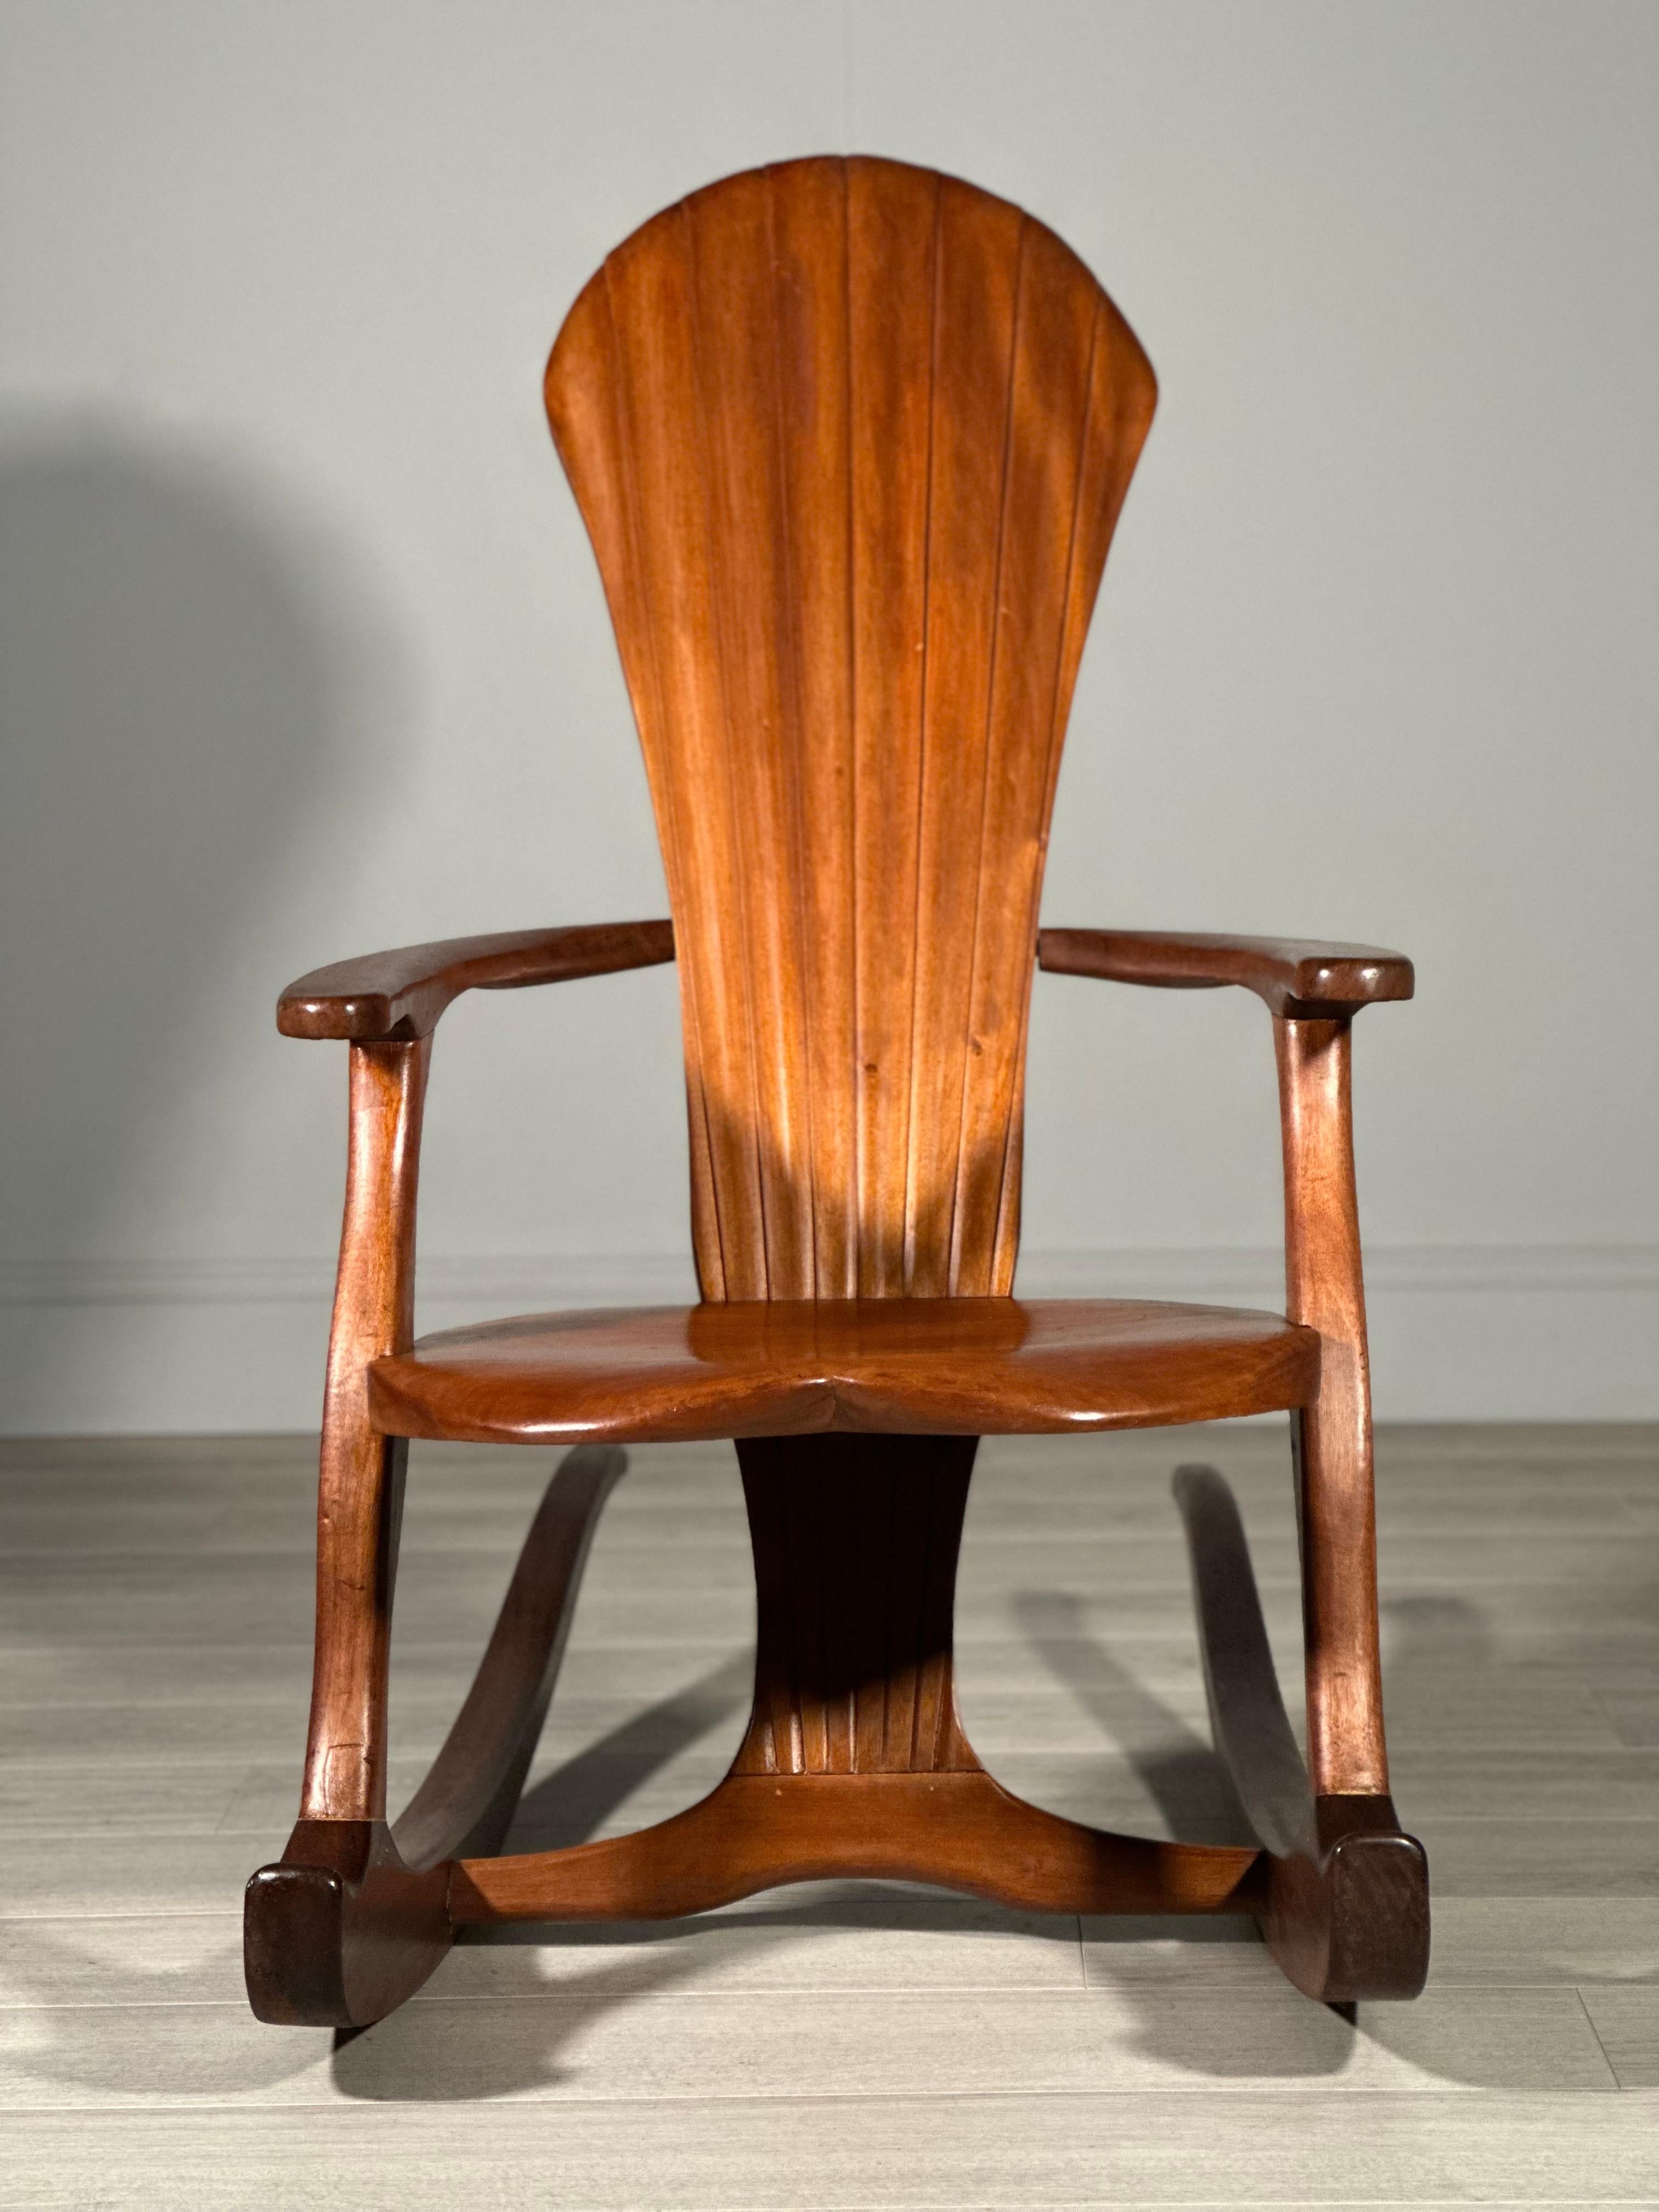 American Classical Large American Shell Back Rocking Chair C.1950 For Sale